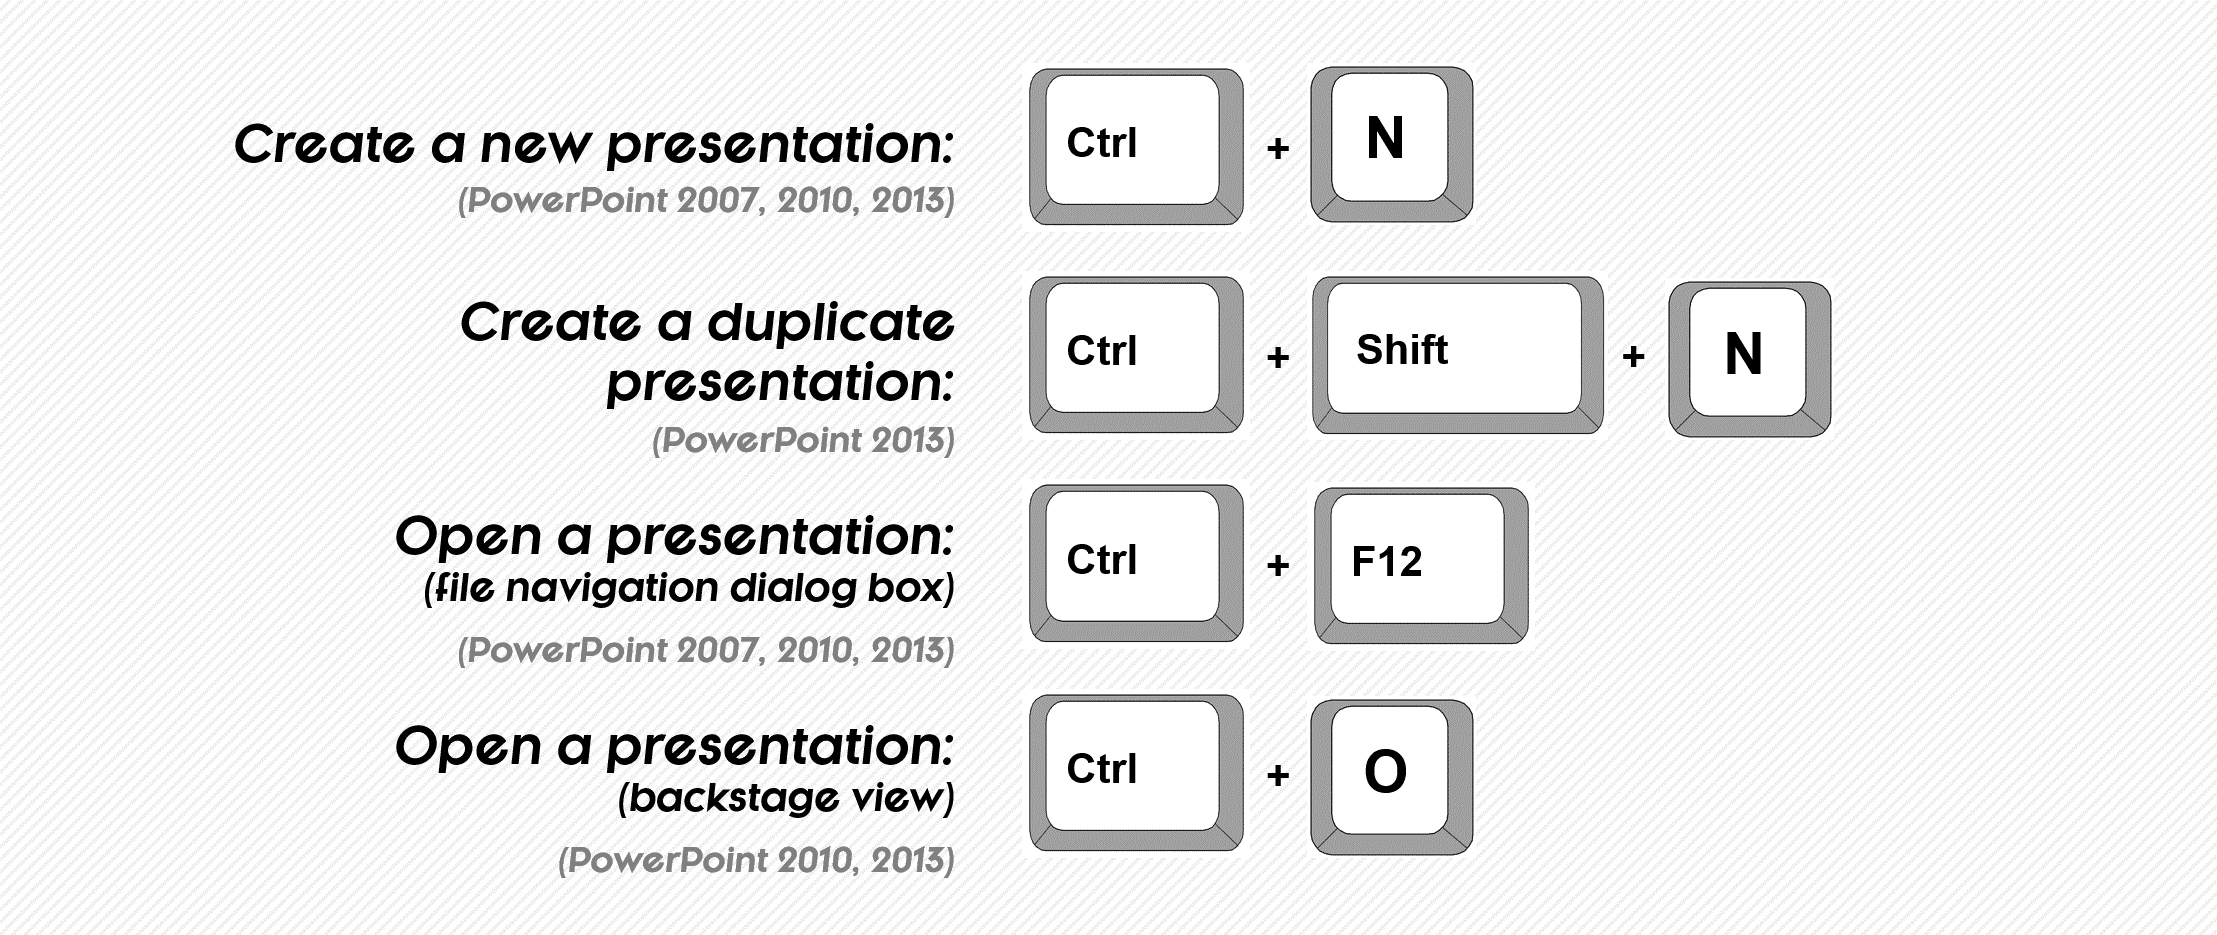 shortcut for opening a new presentation in powerpoint